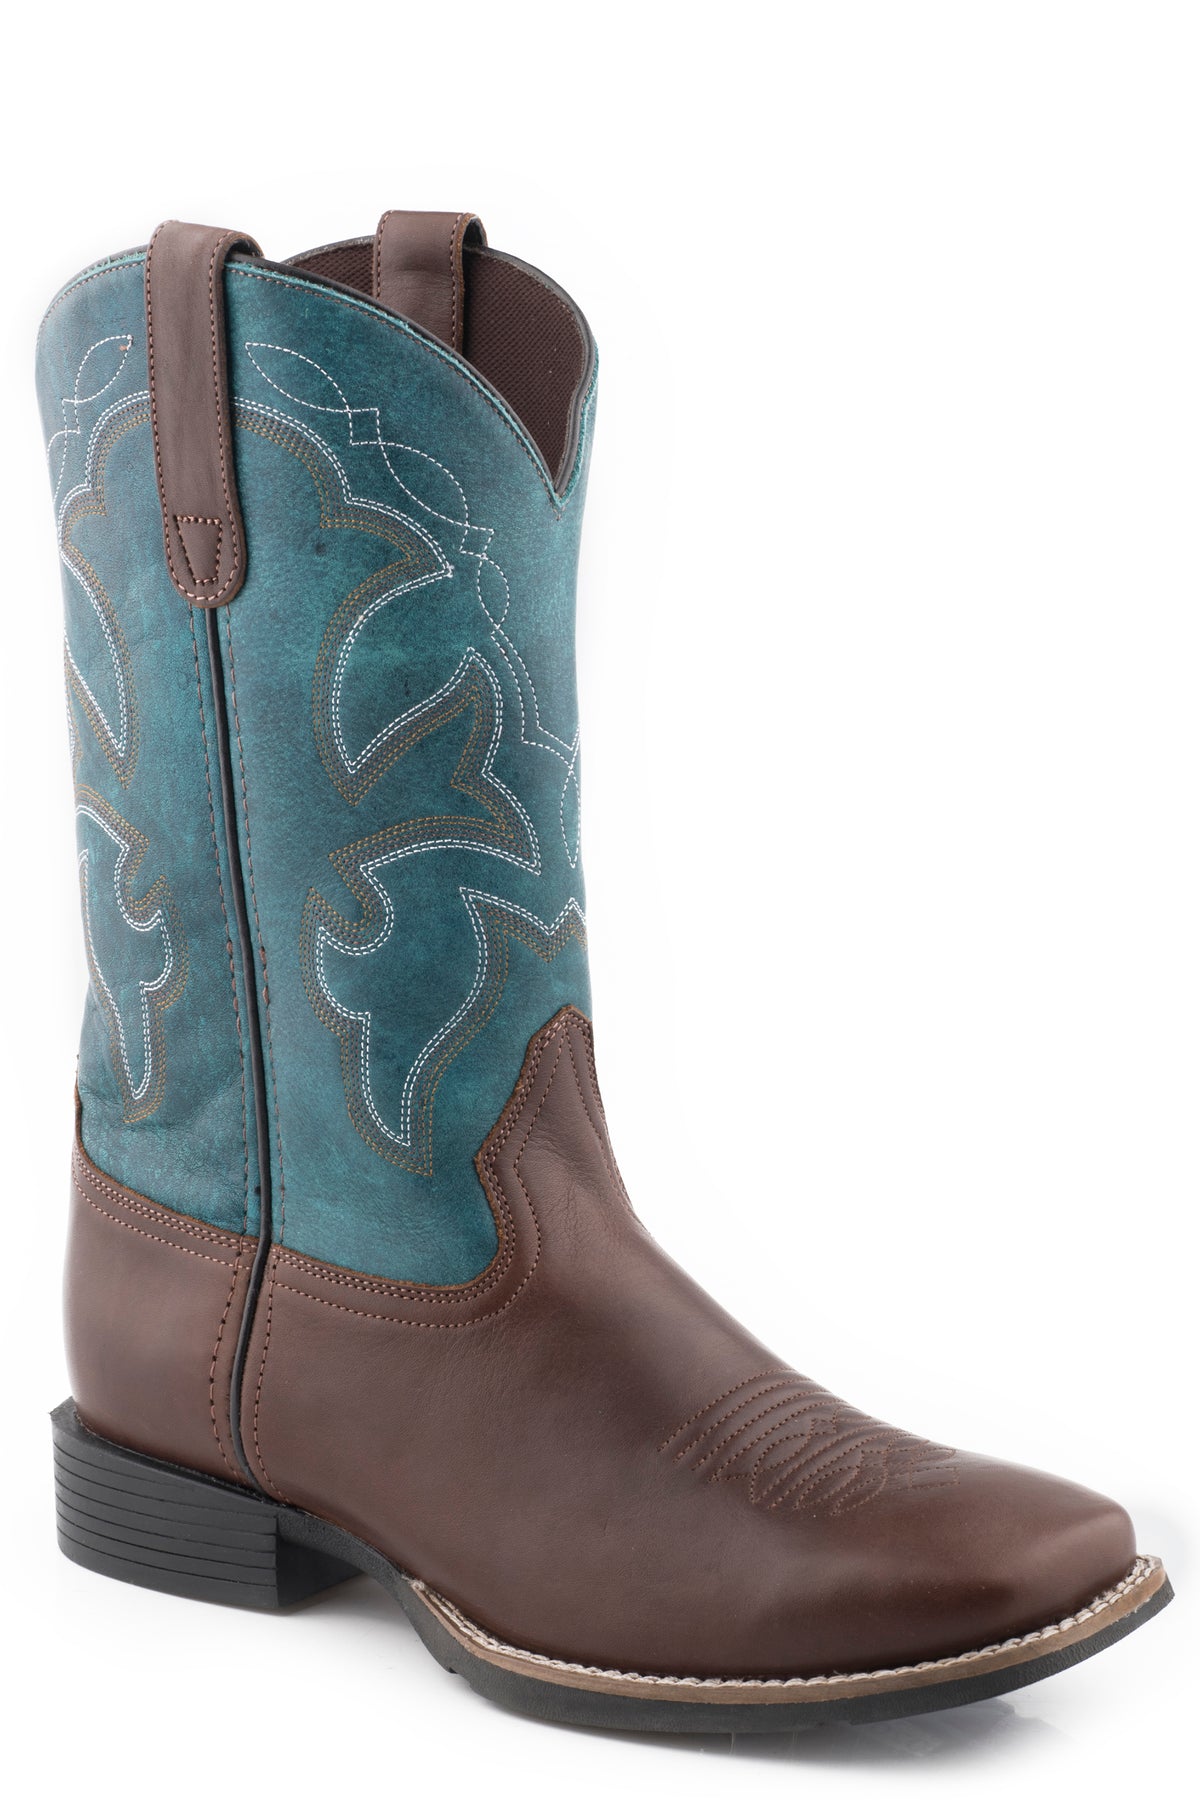 Roper Kids Monterey - Brown Tumbled/Teal Leather